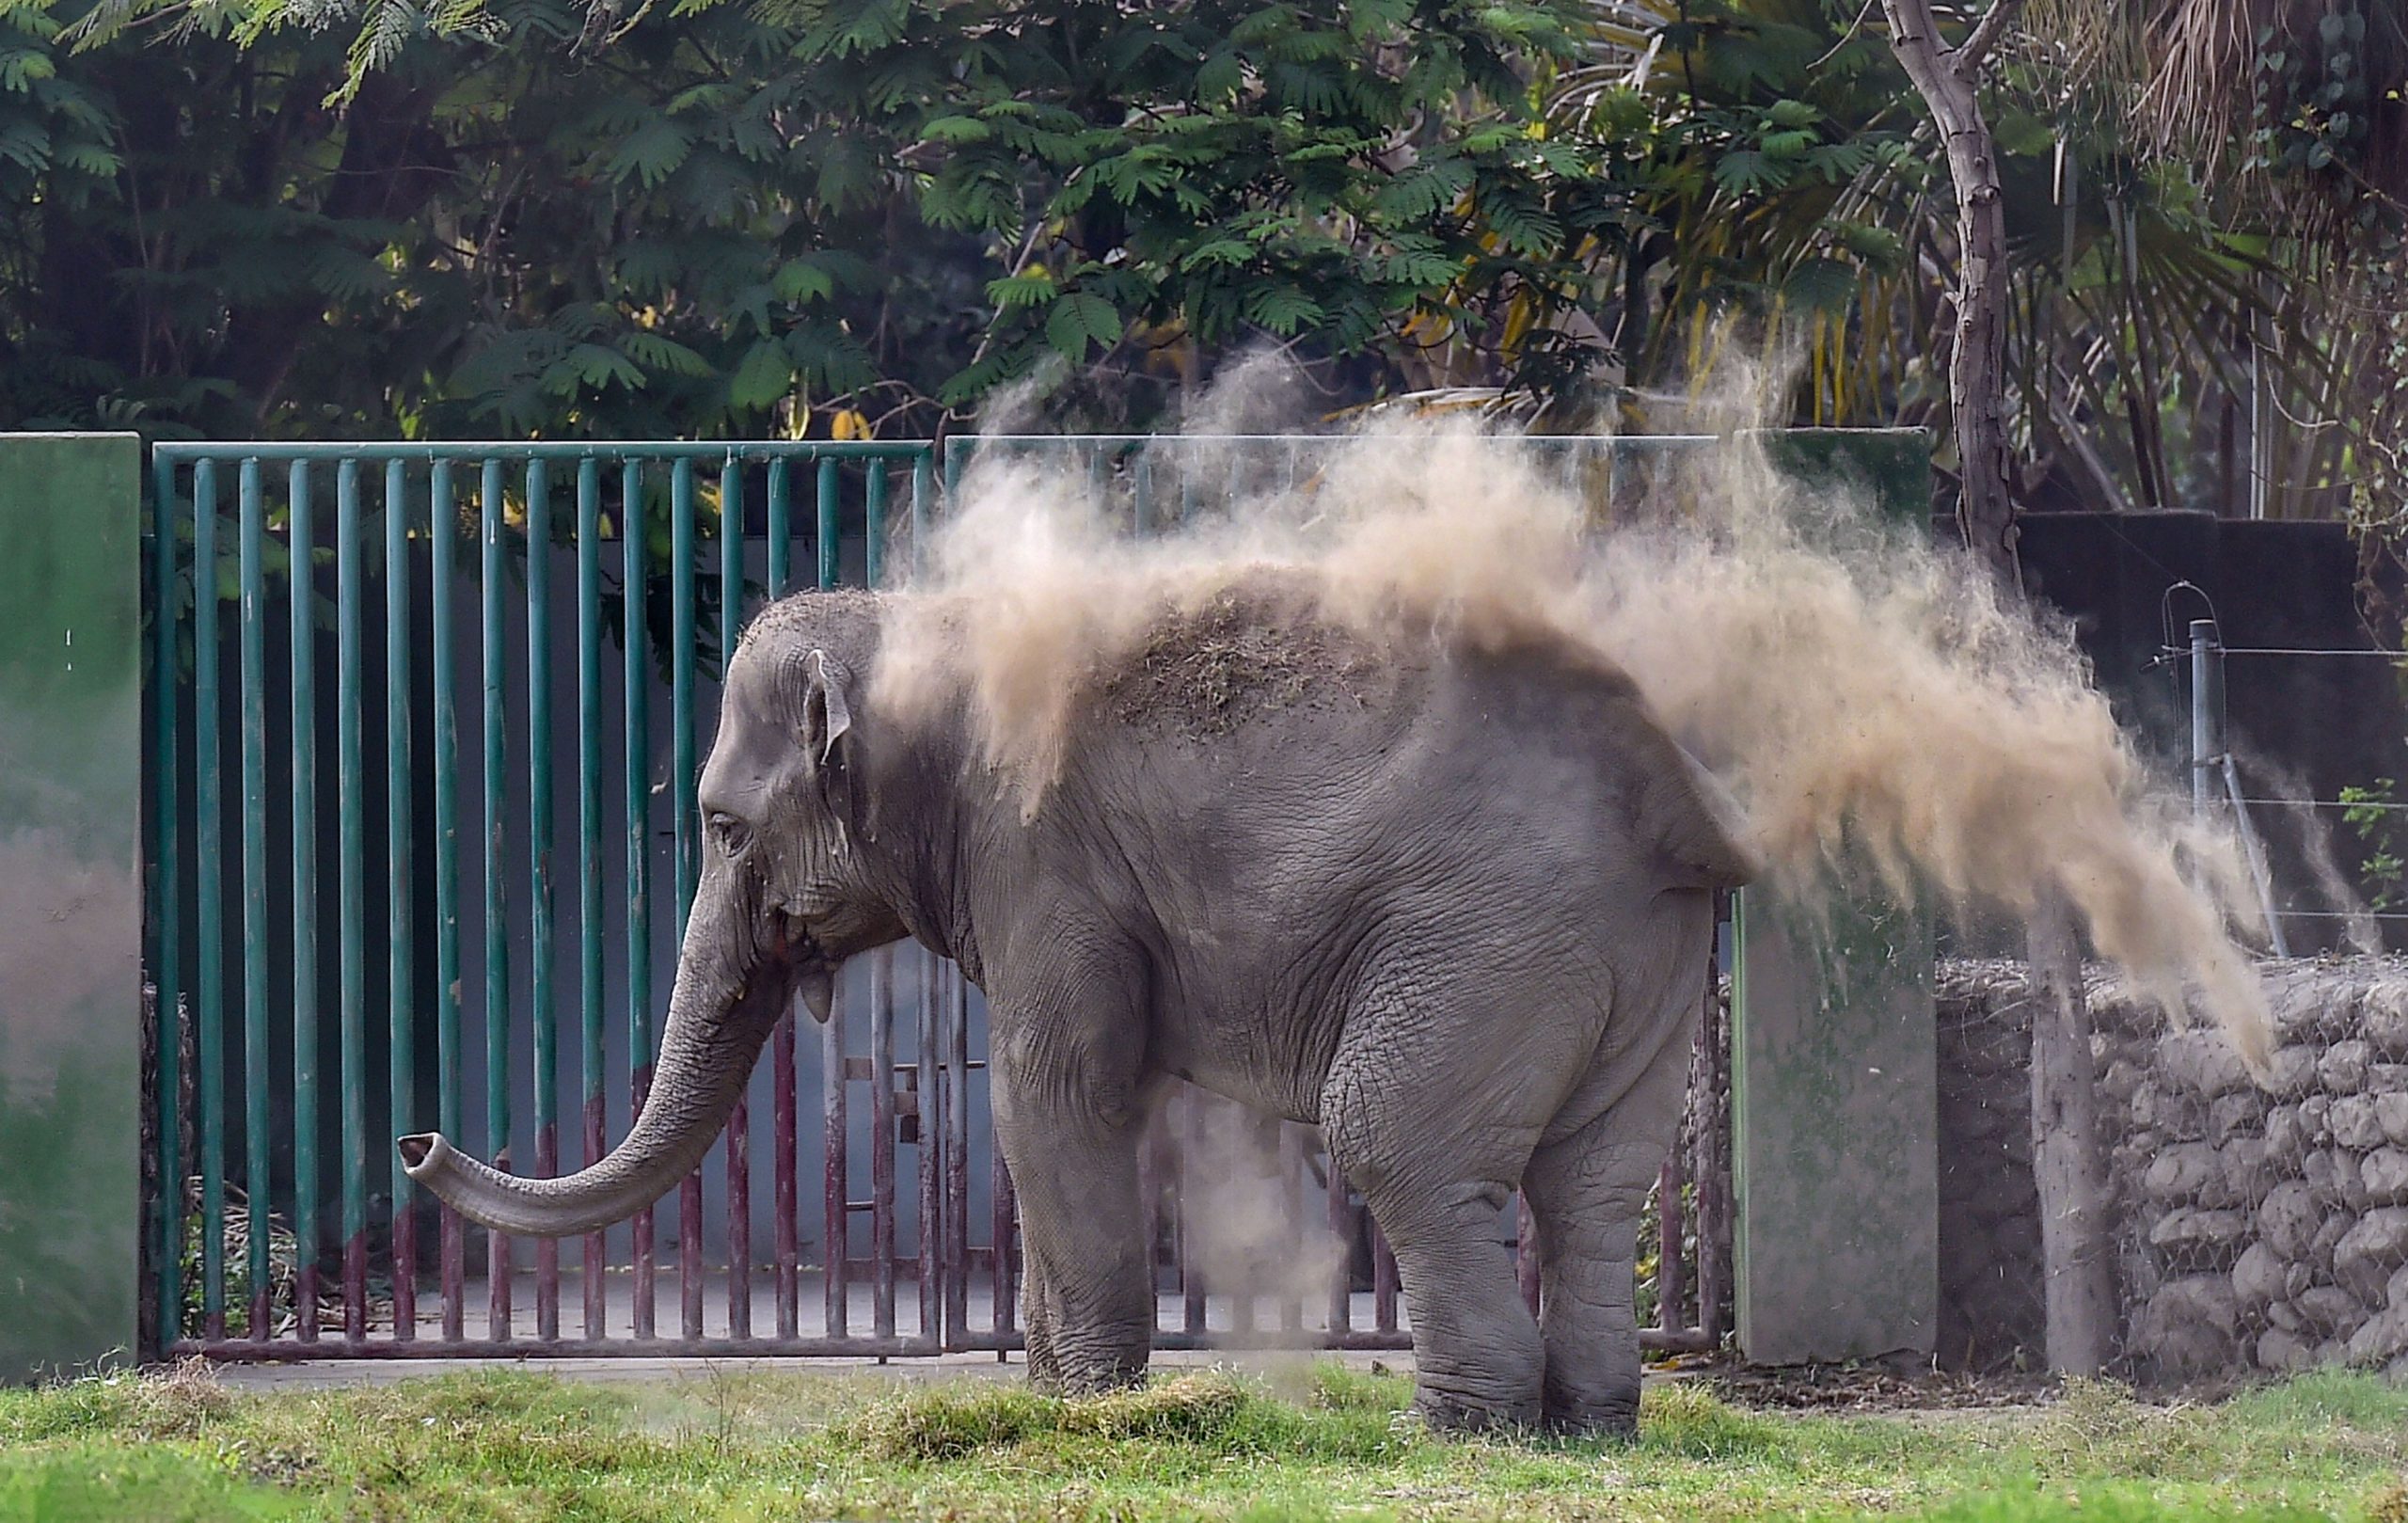 Elephant charges at man who trespassed into its enclosure with toddler